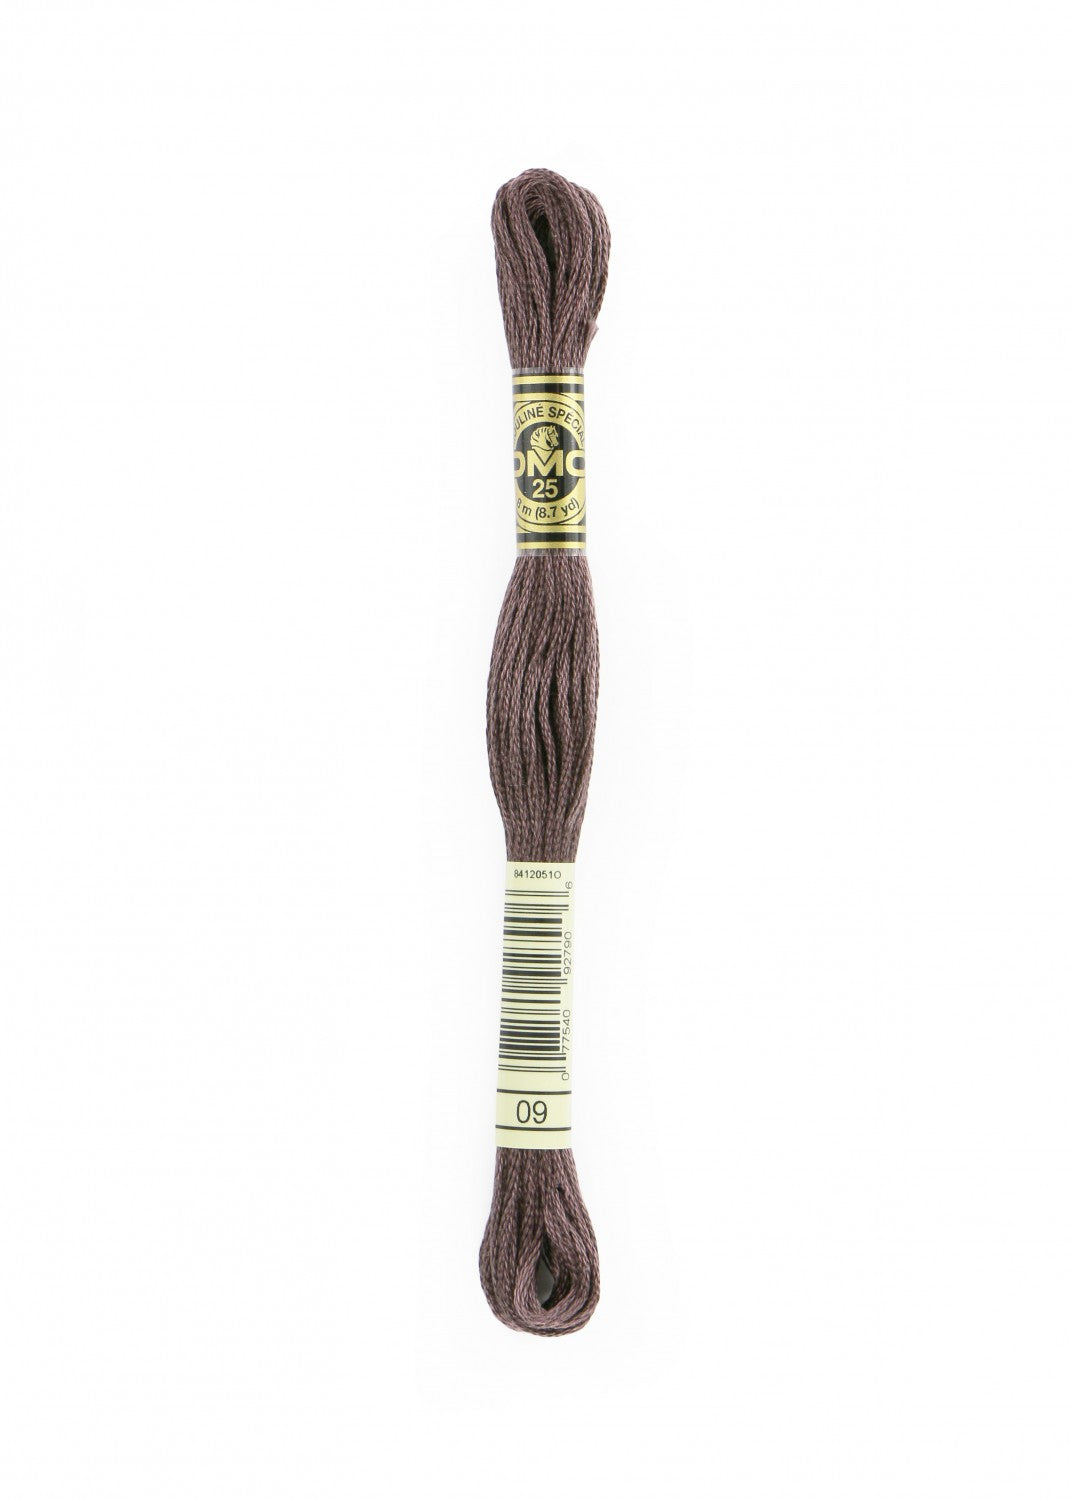 DMC 6-Strand Embroidery Floss 09 Very Dk Cocoa (4853348827181)